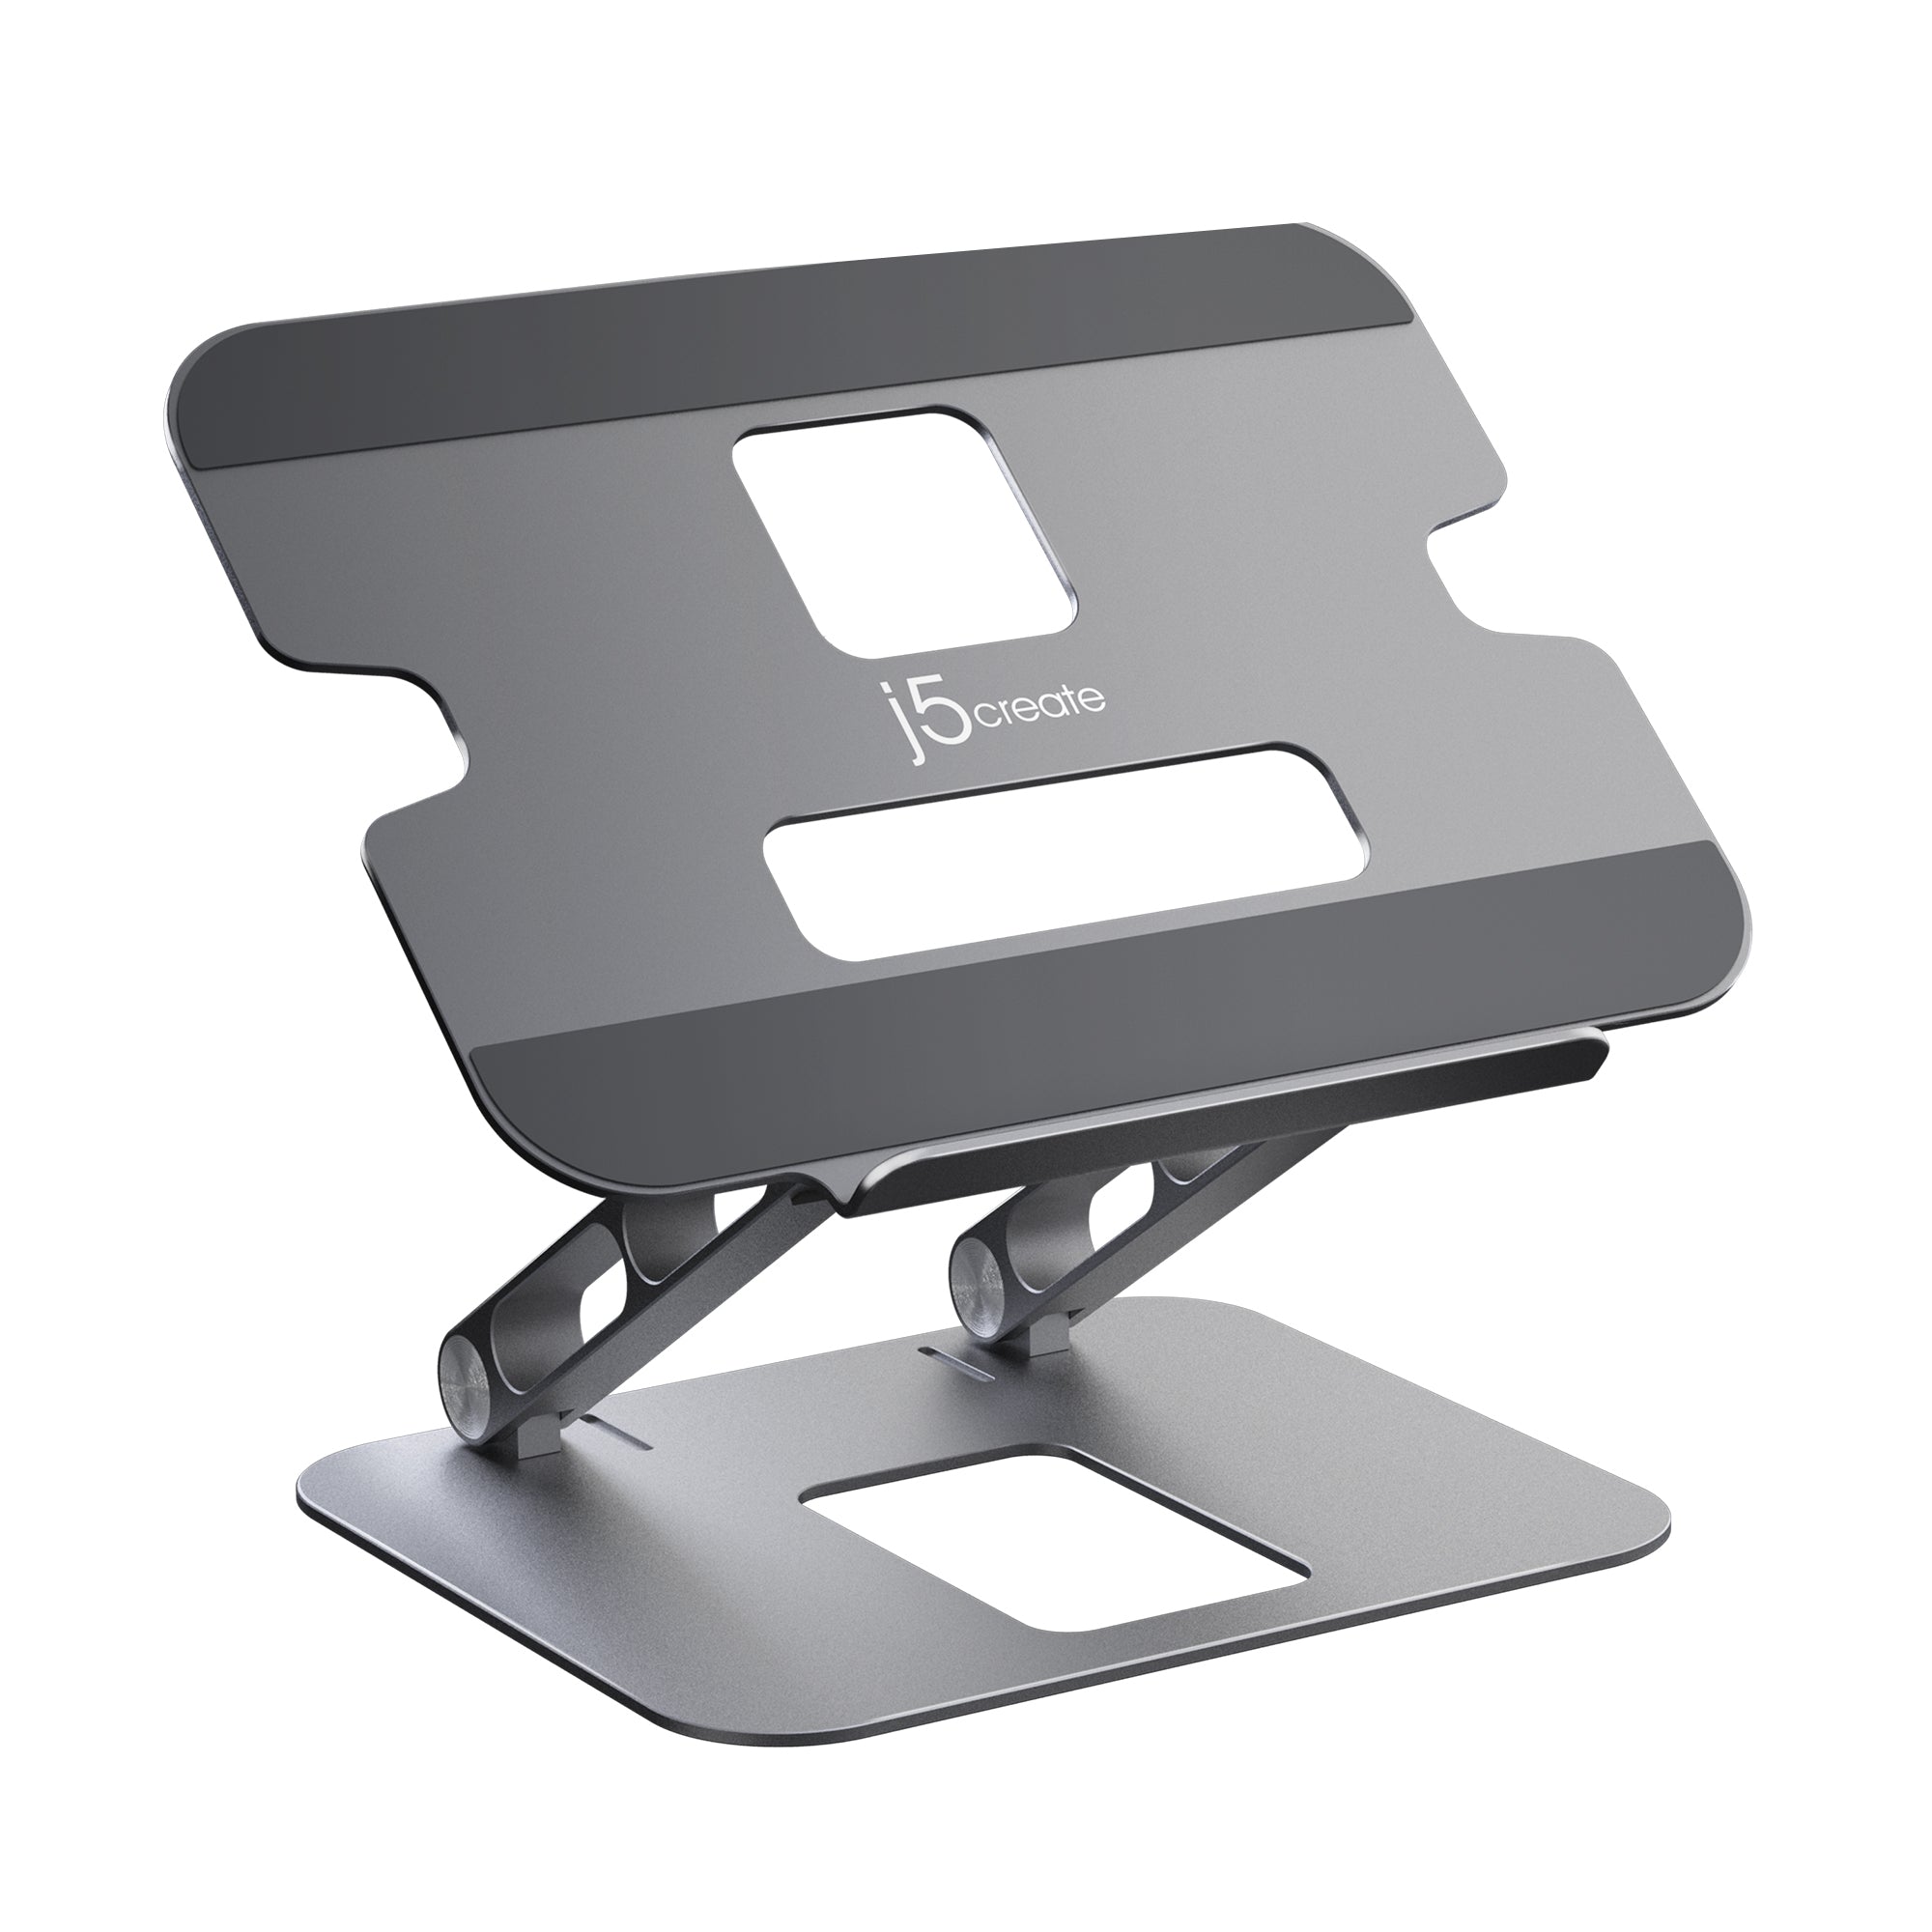 Bewijs Couscous spier Multi-Angle Laptop Stand – j5create